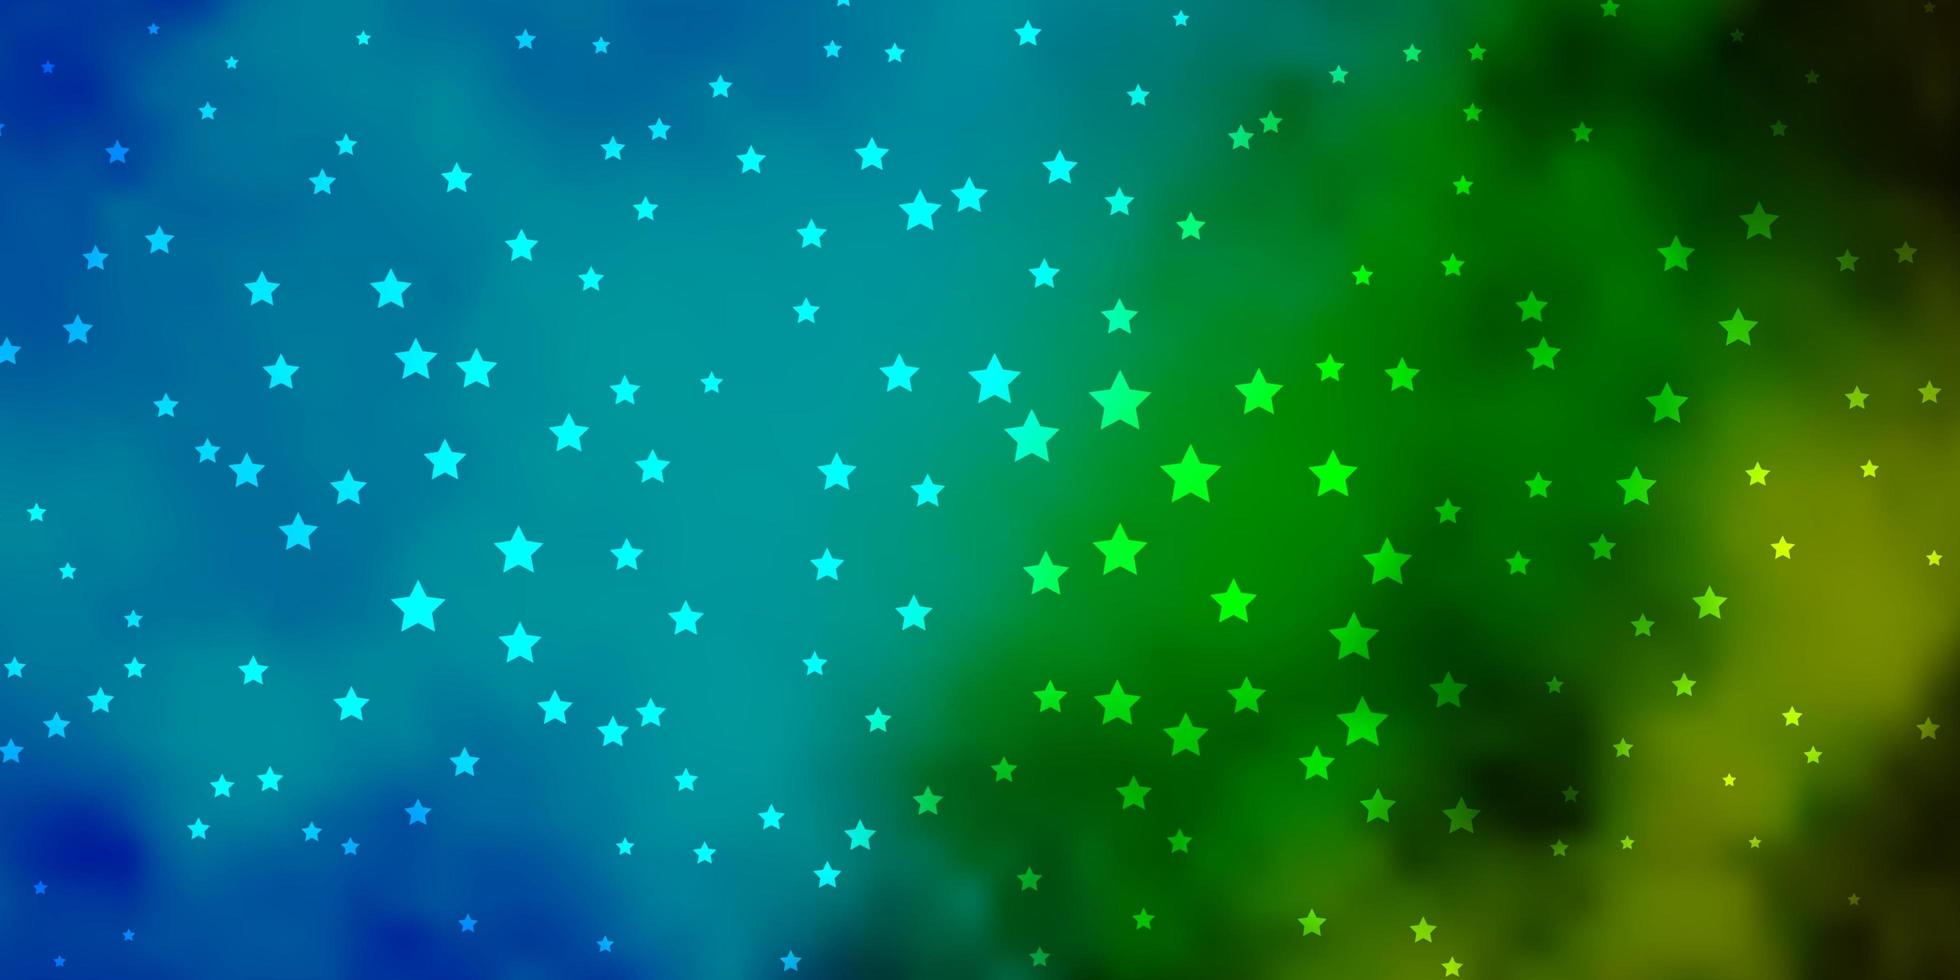 Dark Blue Green vector texture with beautiful stars Shining colorful illustration with small and big stars Theme for cell phones